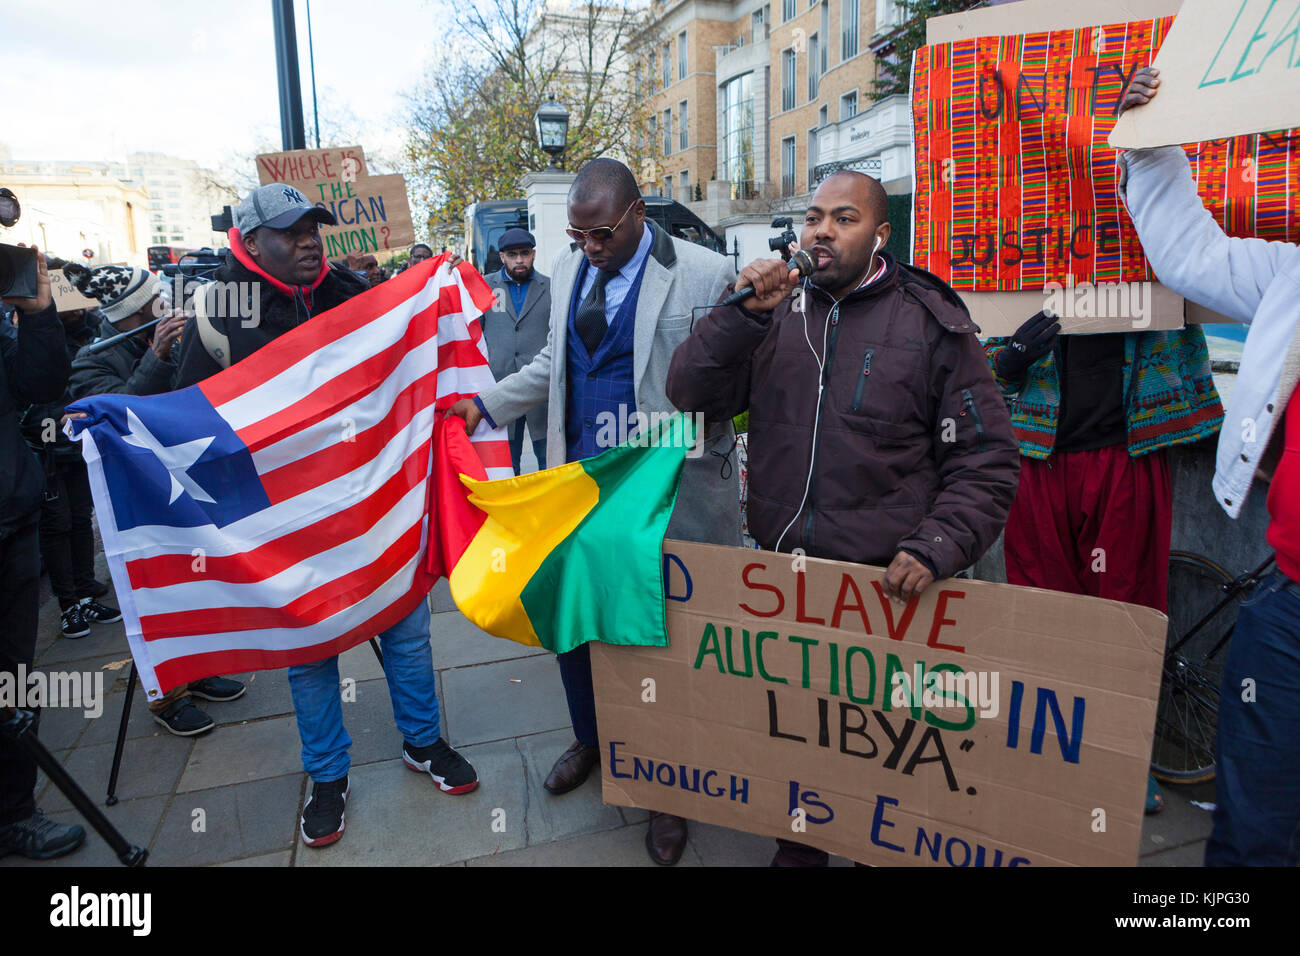 London, UK. 26th Nov, 2017. 26 November, 2017. No Borders, No Slavery Protest. Embassy of Libya, London UK. Following recent videos and reports released on migrant slave auctions in Libya, anti-slavery groups and SOAS Student Union and following along with French intellectuals like Tiken Jah Fakoly, hold a protest outside the Libyan Embassy in London. Organisers claim that despite this evidence the EU and UK continue to work with Libyan authorities to imprison migrants or leave them to drown in international waters. Credit: Steve Parkins/Alamy Live News Credit: Steve Parkins/Alamy Live News Stock Photo